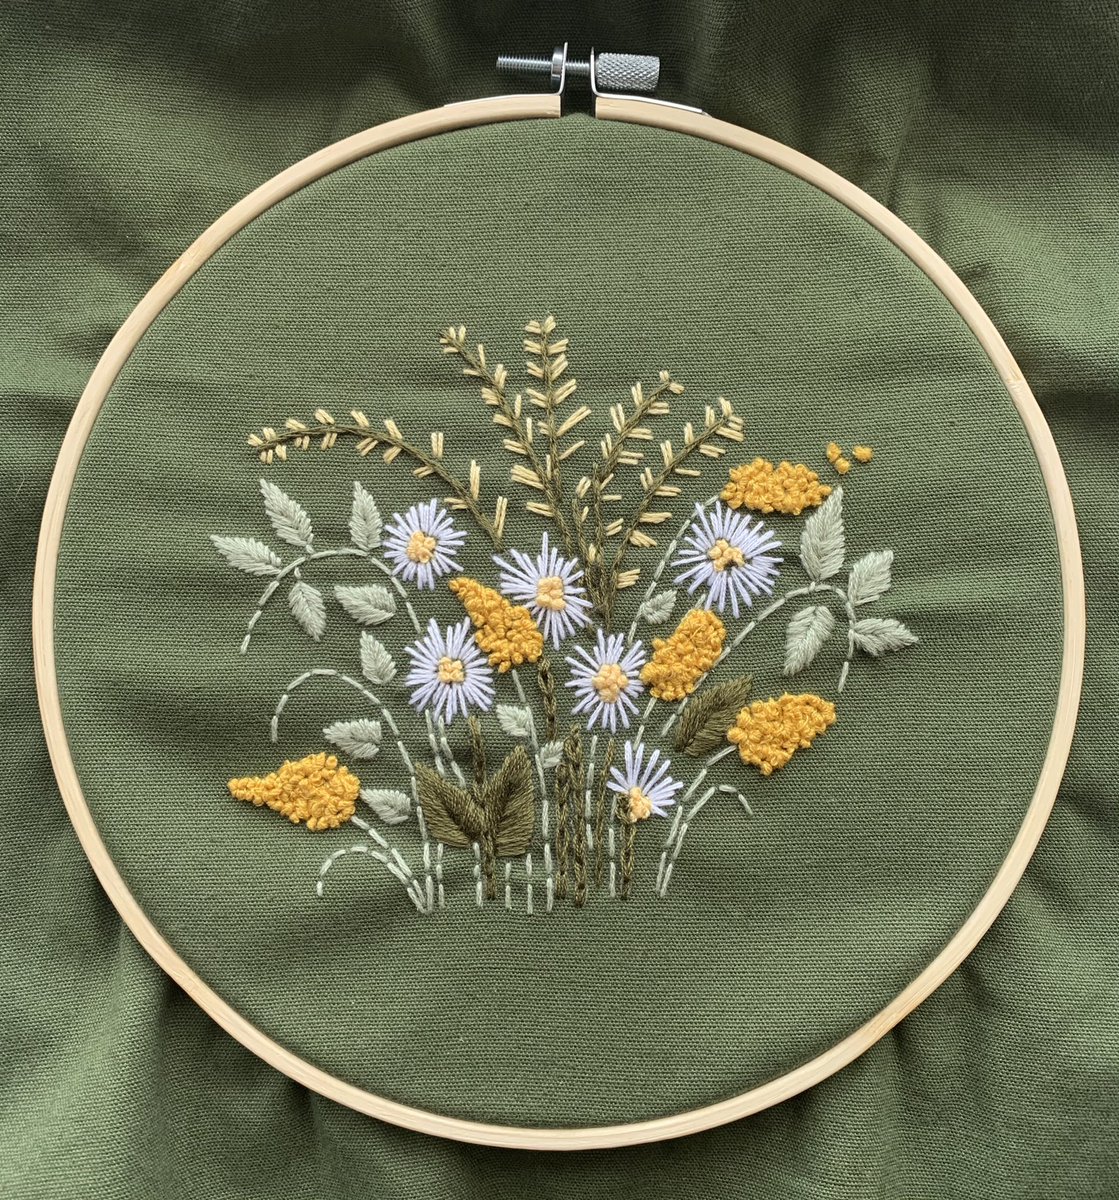 Summer winds 🌾

Another embroidery piece! I really love doing these at the moment, they’re so relaxing to do.. even if I stab myself by accident a few times 😂 

#embroidery #embroideryflowers #sewing #flowers #artistsontwitter